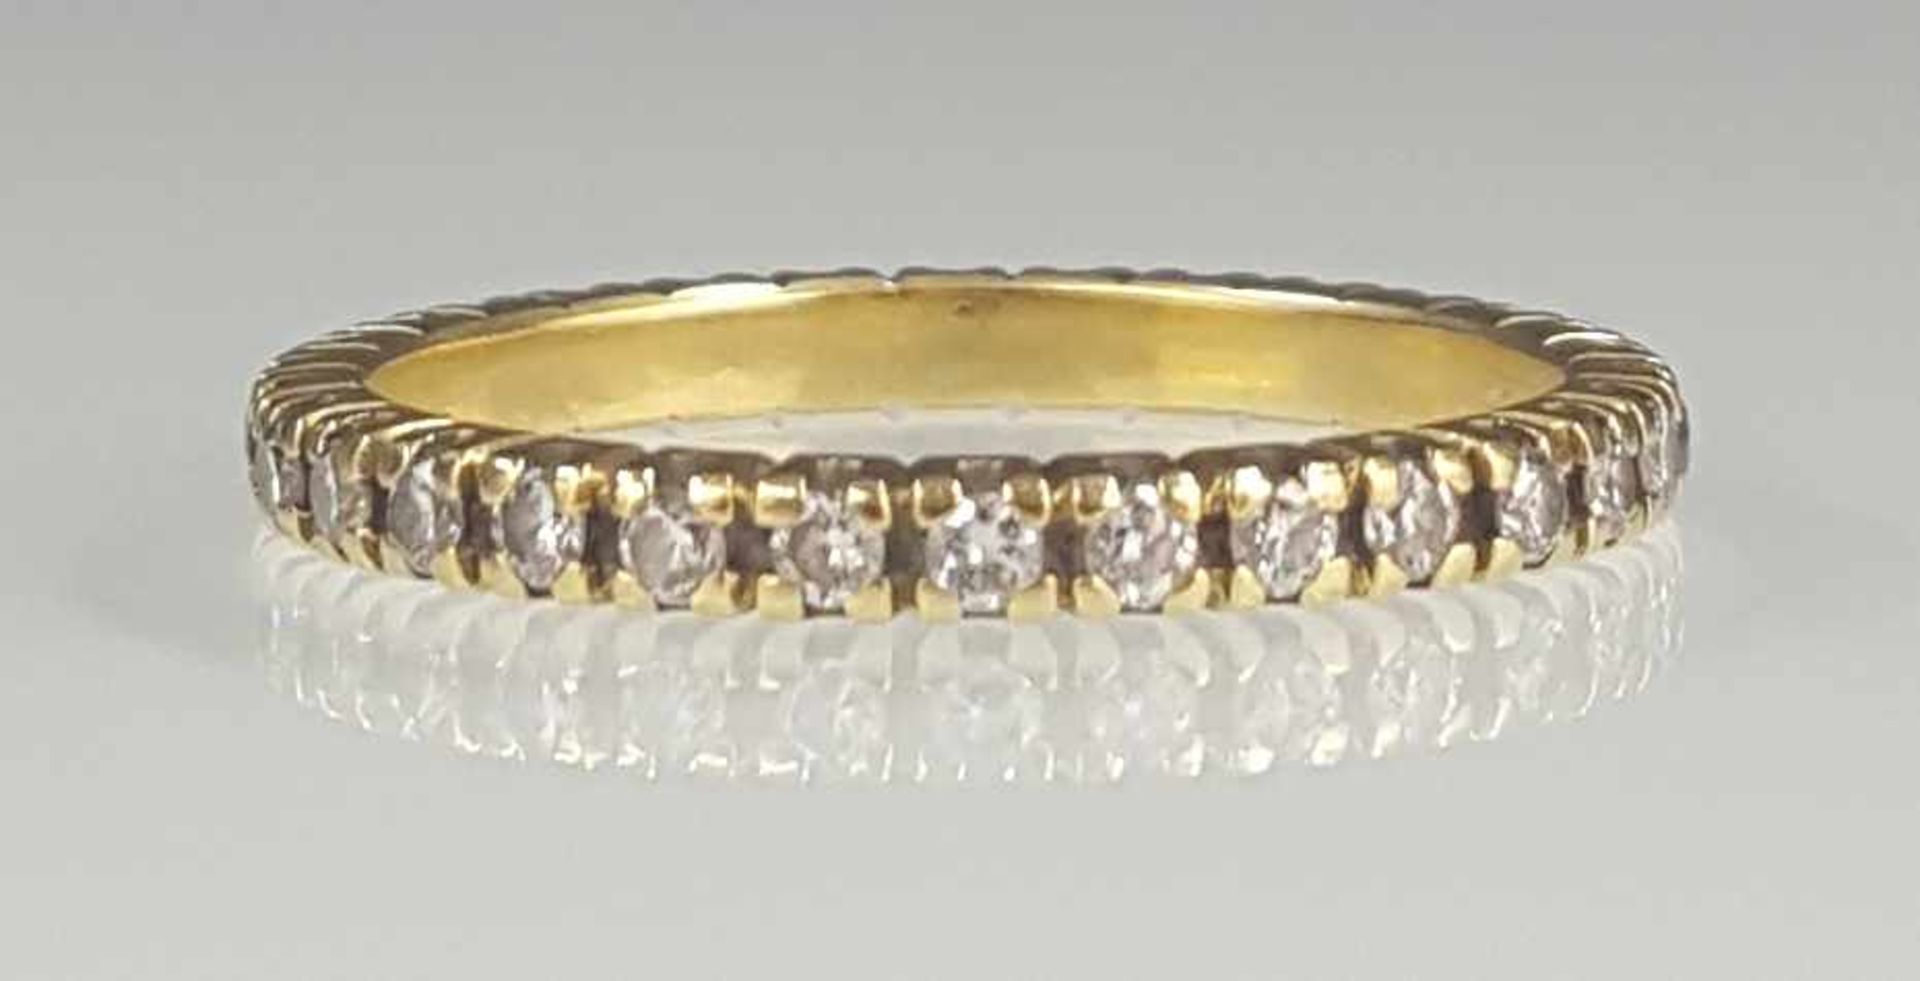 Memory ring, 750 yellow gold, set with 30 diamonds.